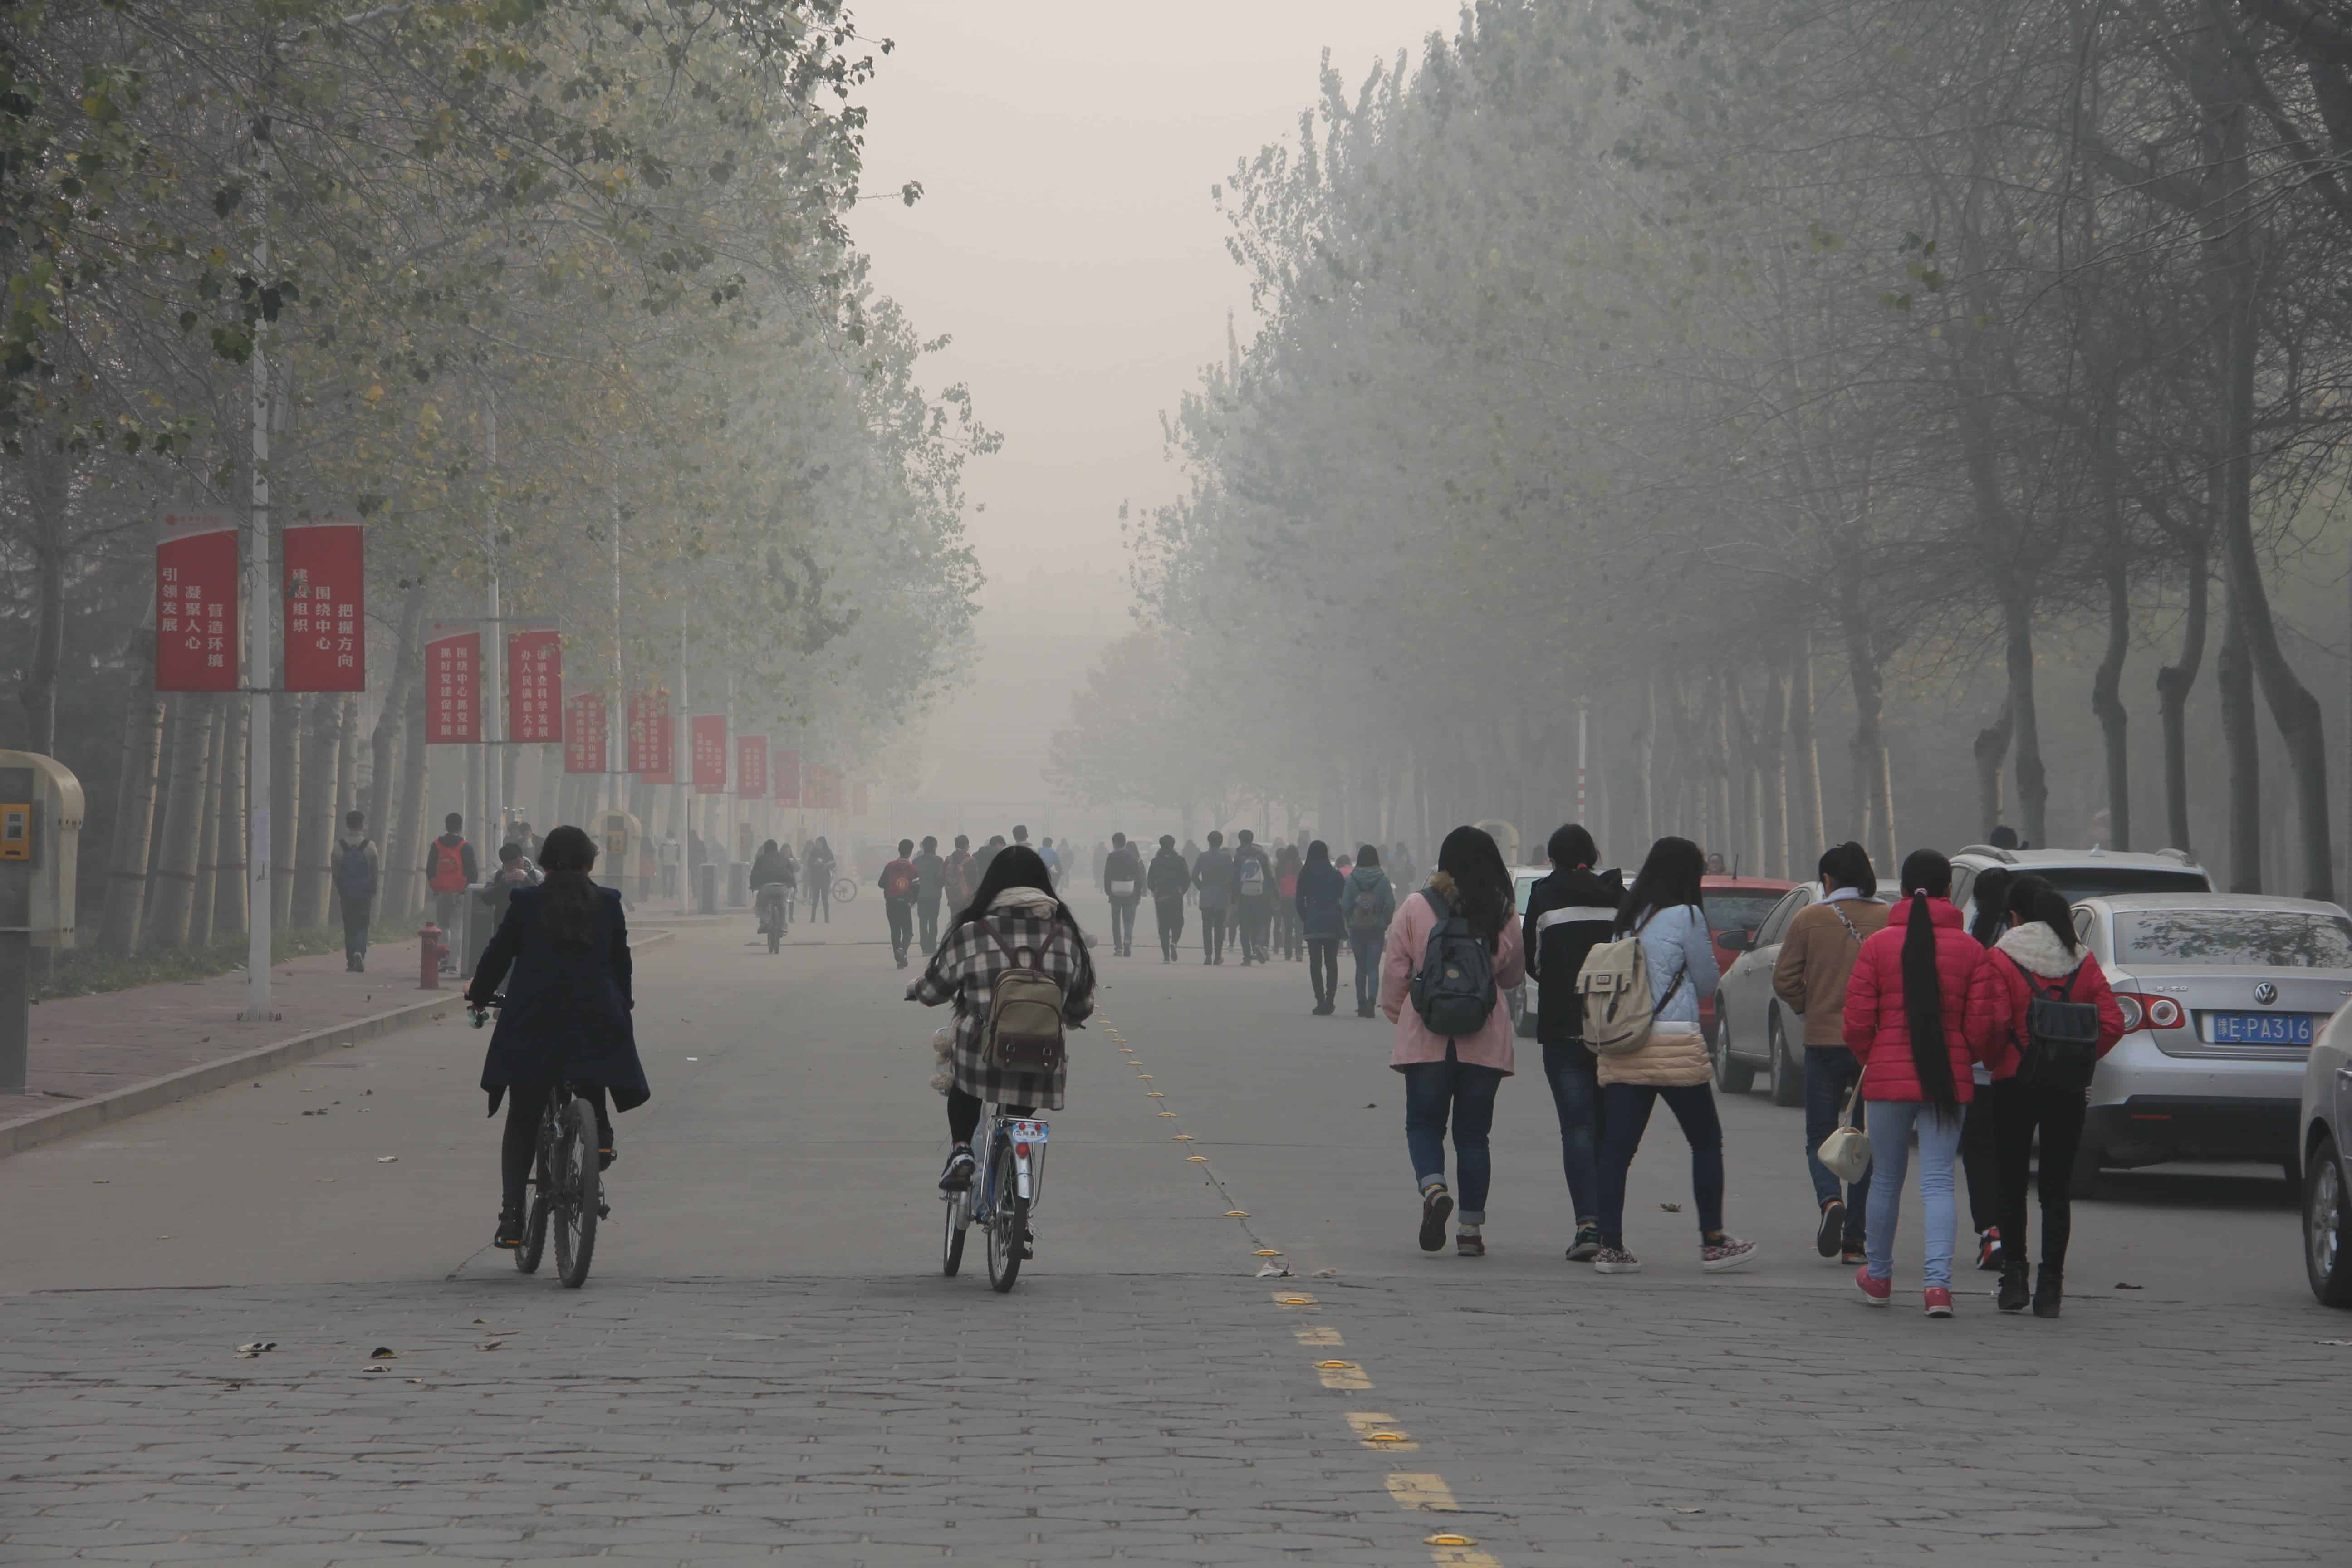 The city of Anyang in China, challenged by air pollution. Credit: V.T Polyworda (Flickr)